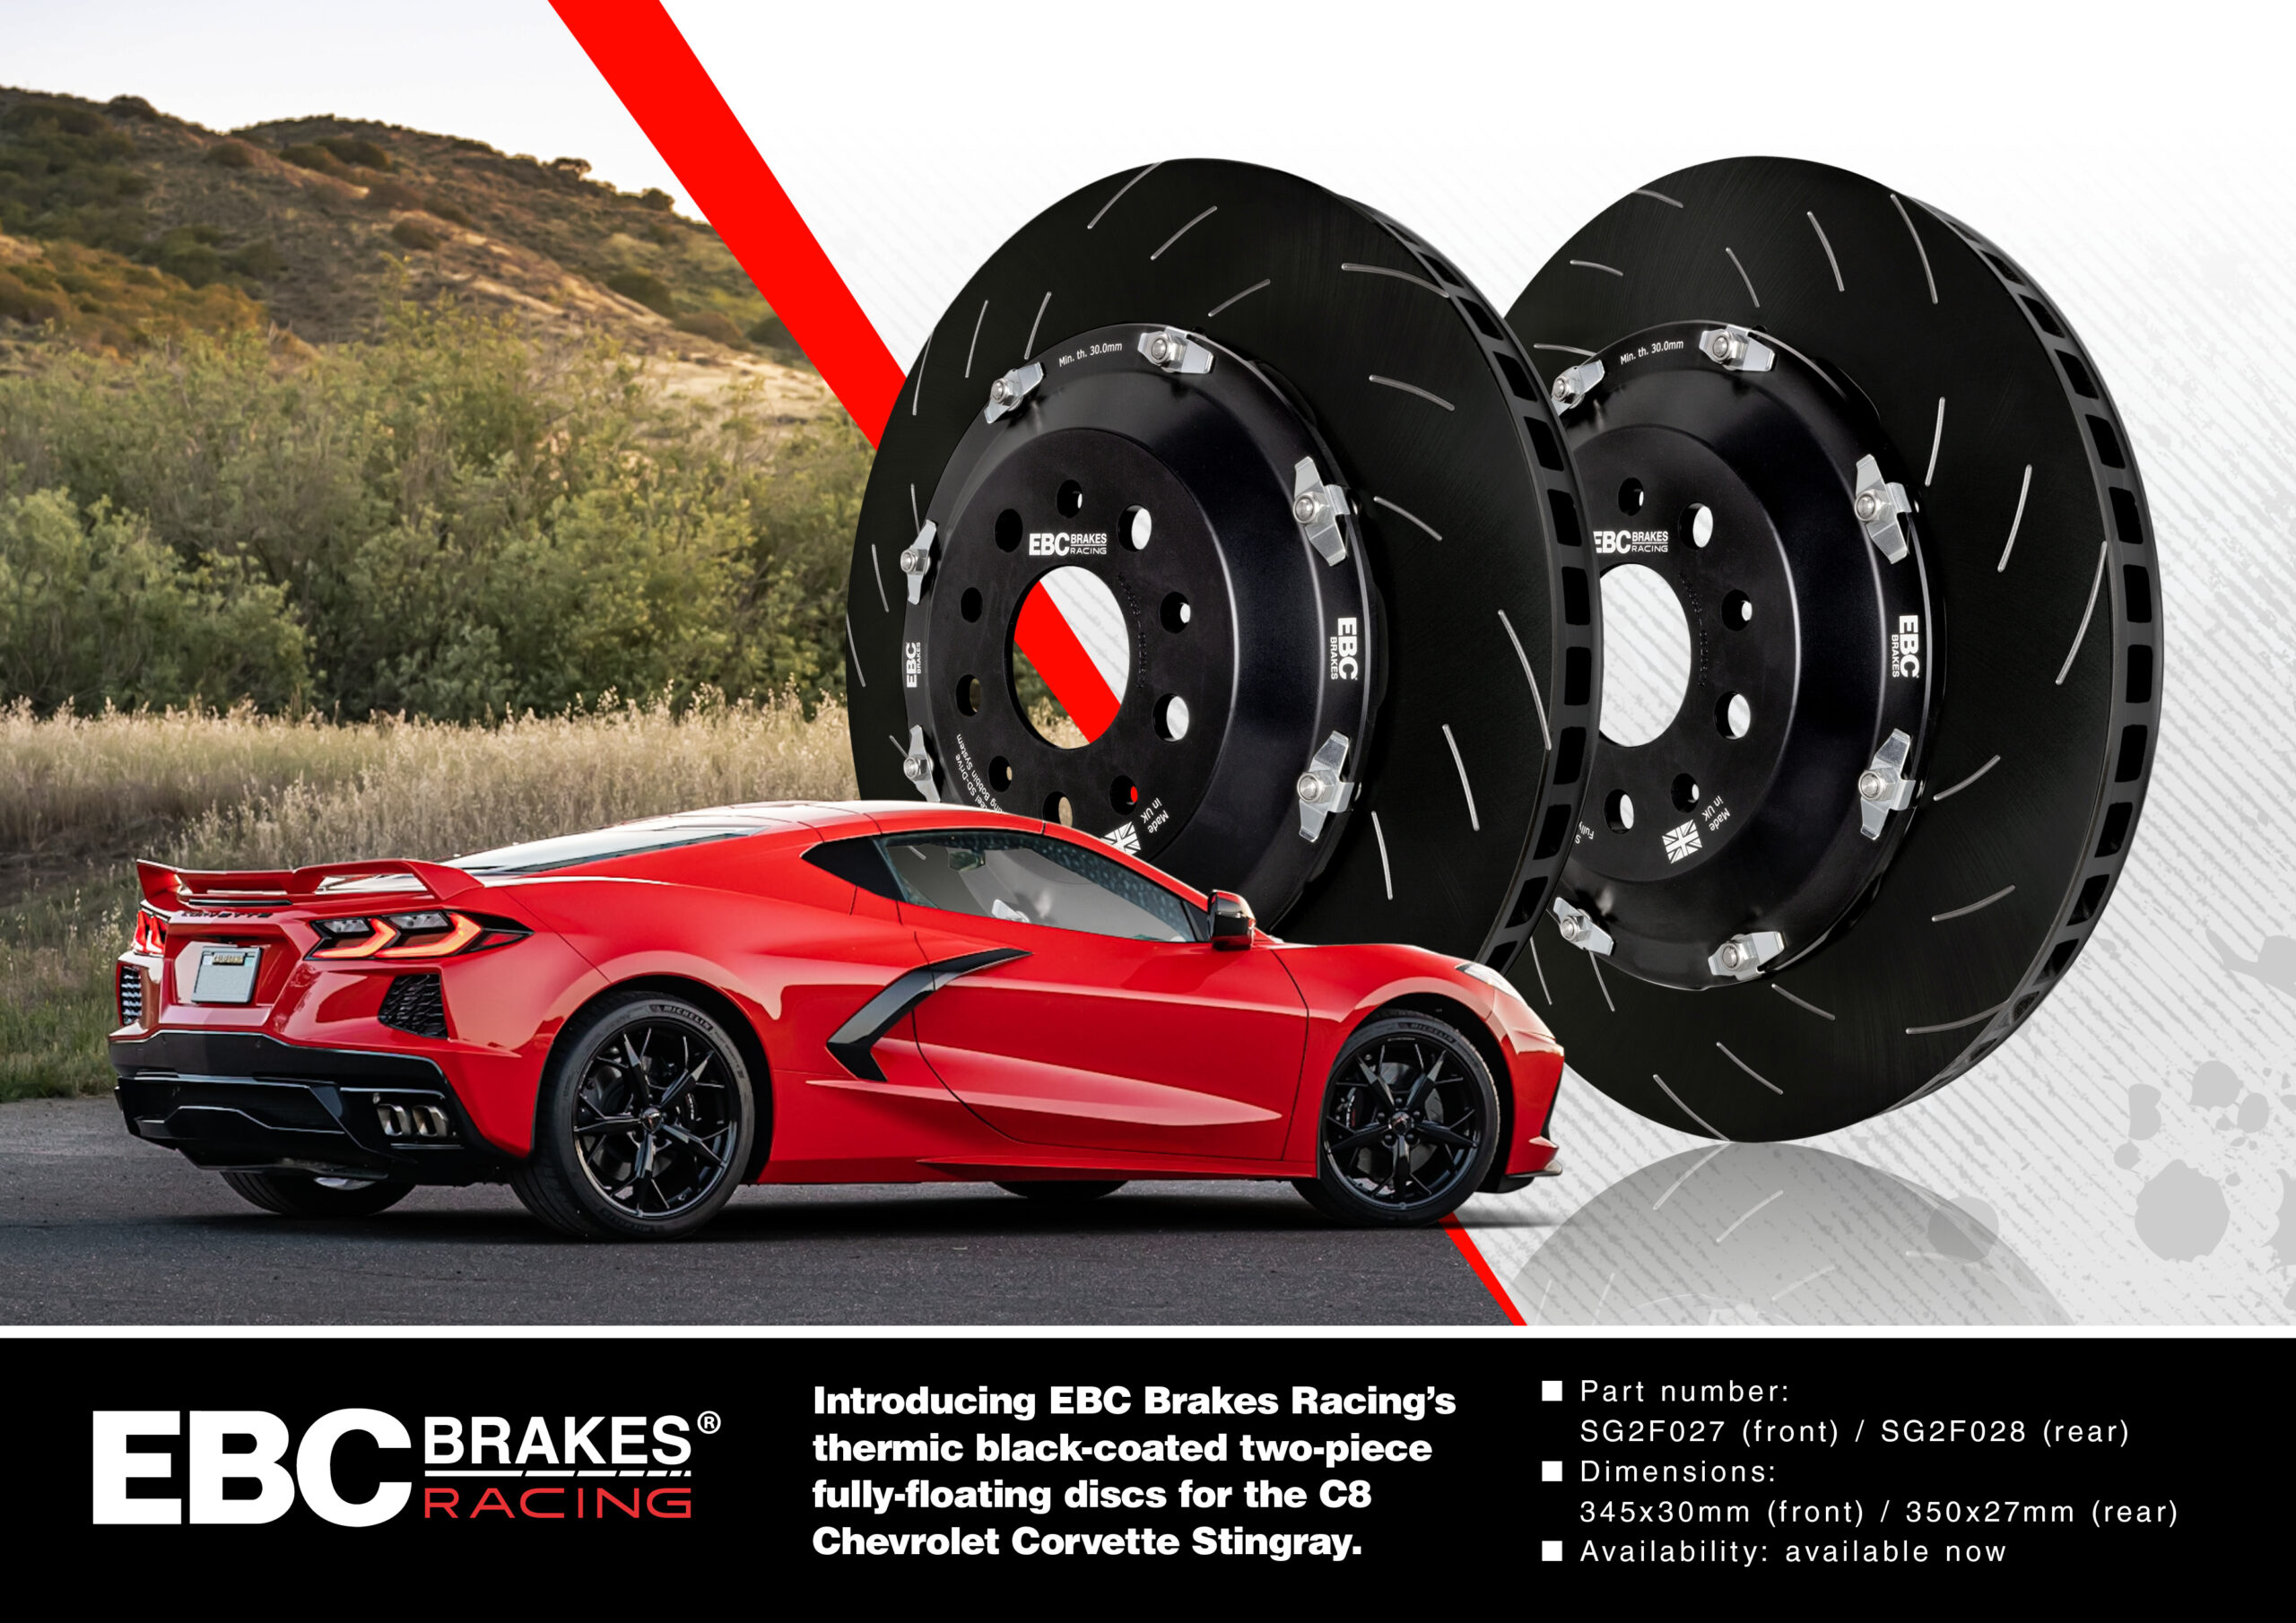 Now Available: EBC Brakes Racing Fully Floating Two-Piece Discs for C8 Chevrolet Corvette Stingray